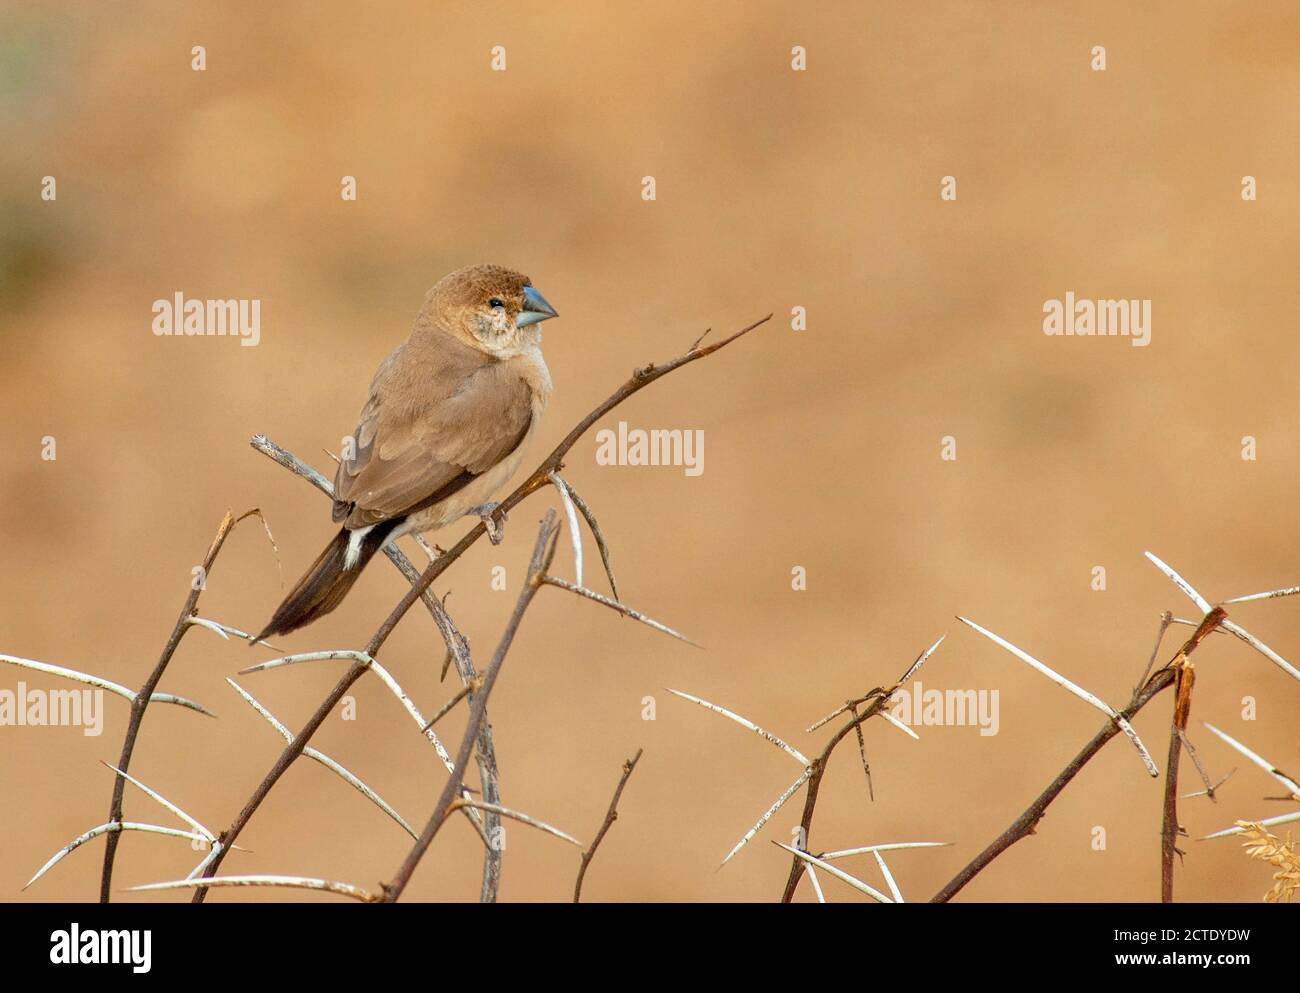 Indian silverbill, White-throated munia (Euodice malabarica, Lonchura malabrica), perched in low acacia bush with spiky thorns, India Stock Photo